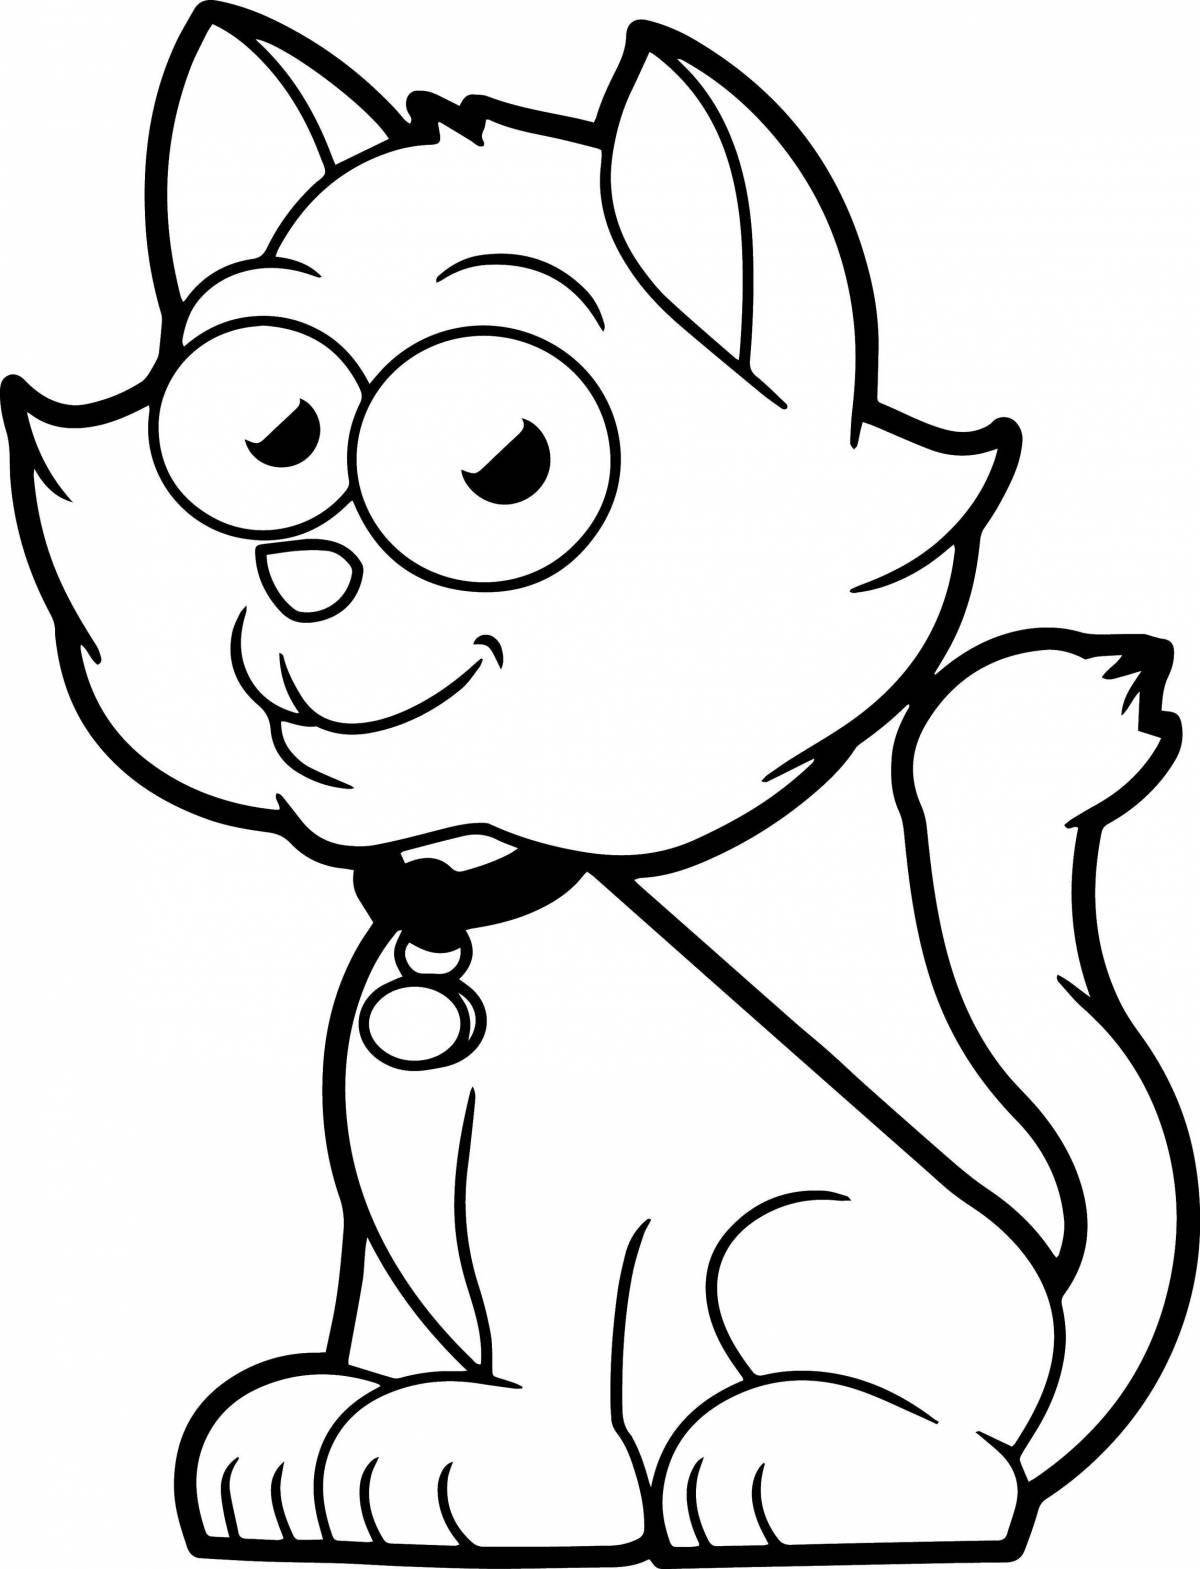 Soft cat coloring page